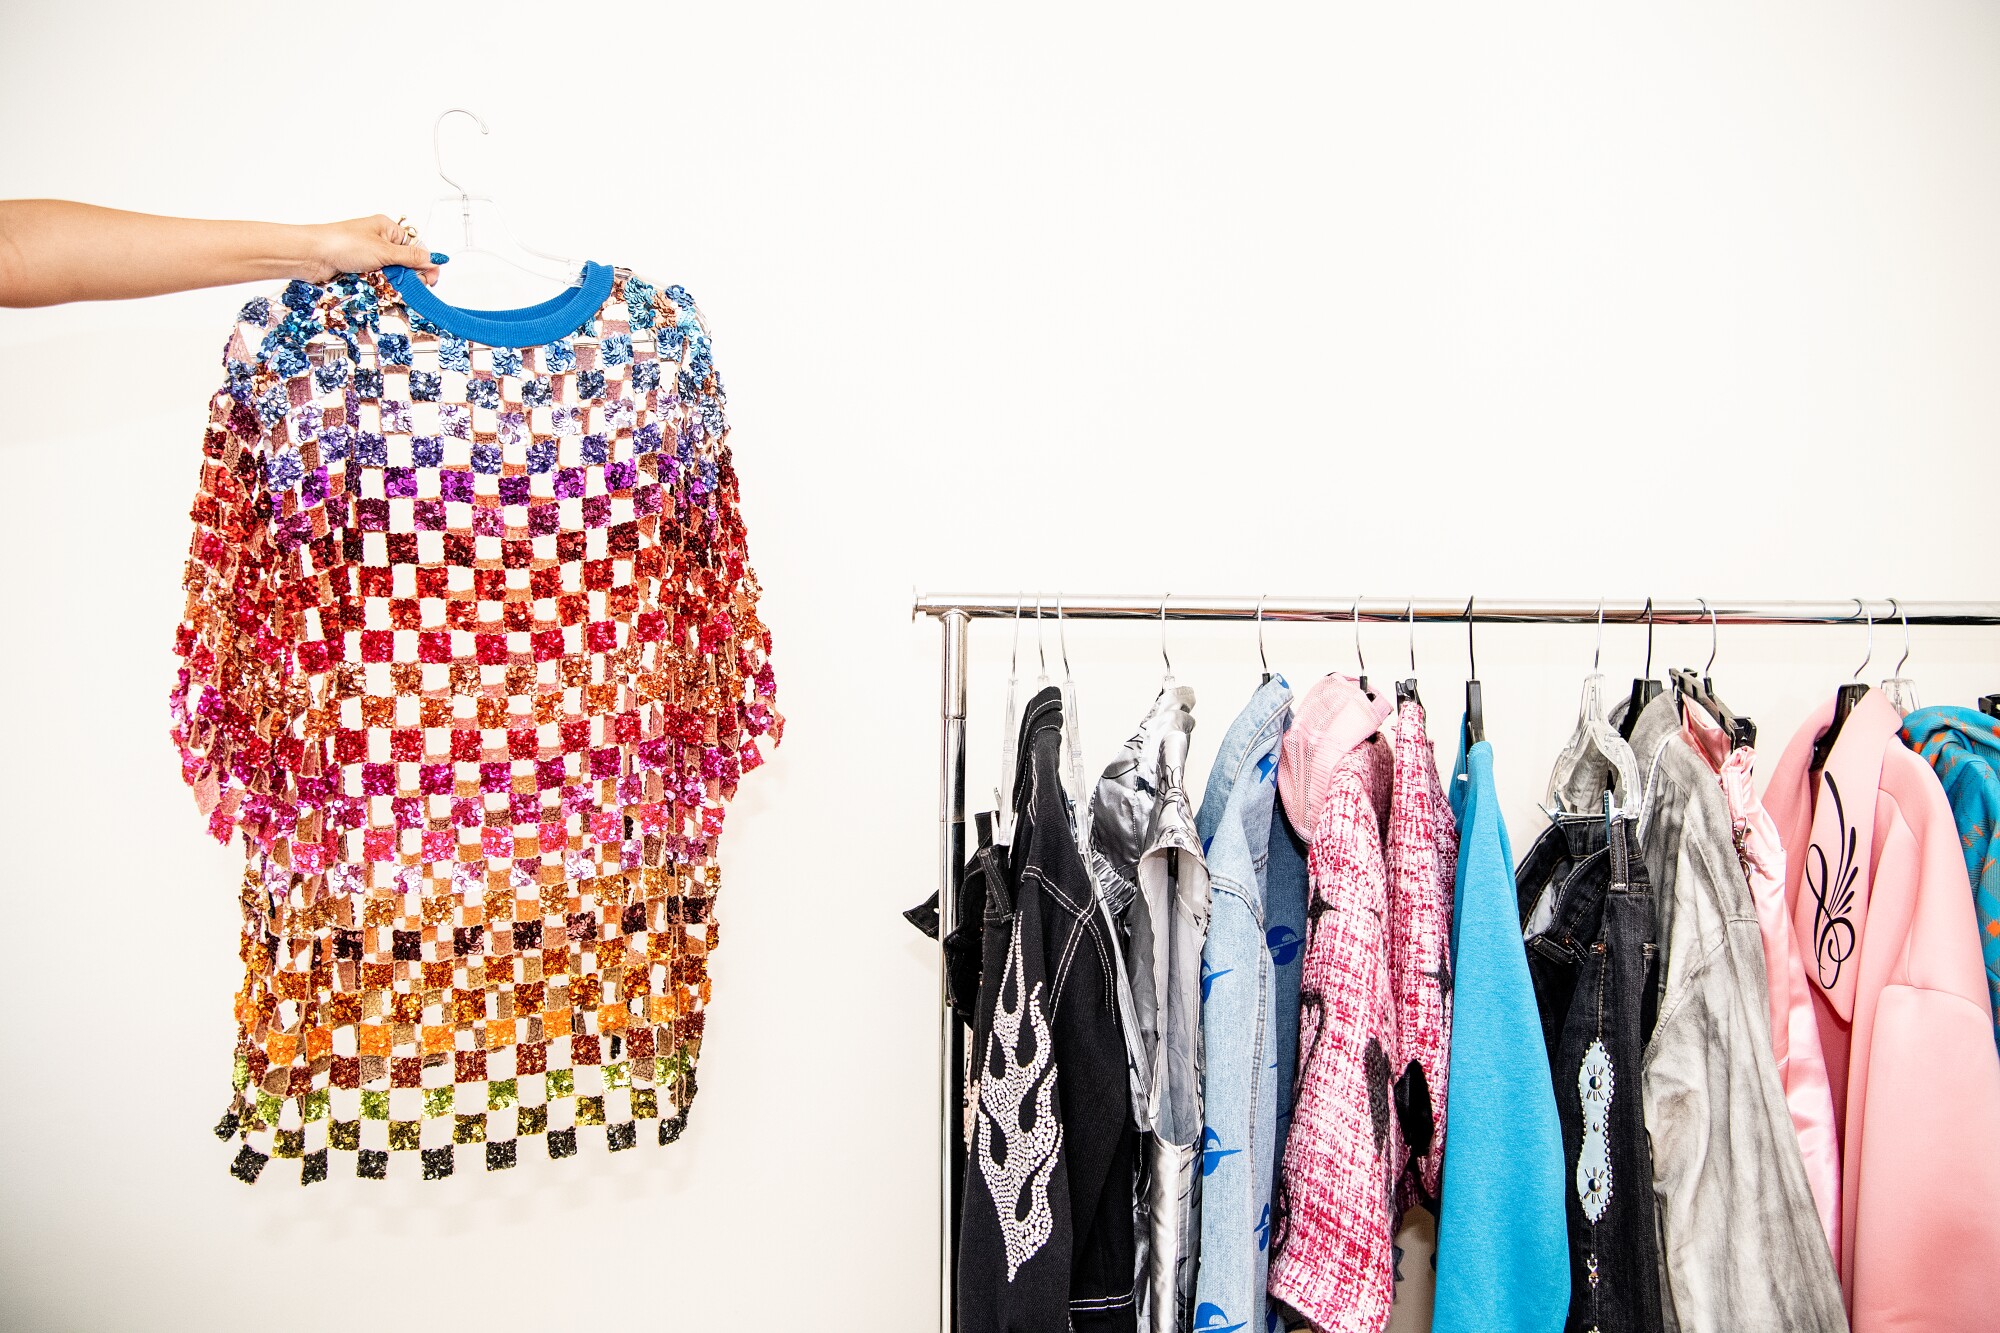 Stylist Keyla Marquez holds up a colorful sequined shirt next to a rack of clothing